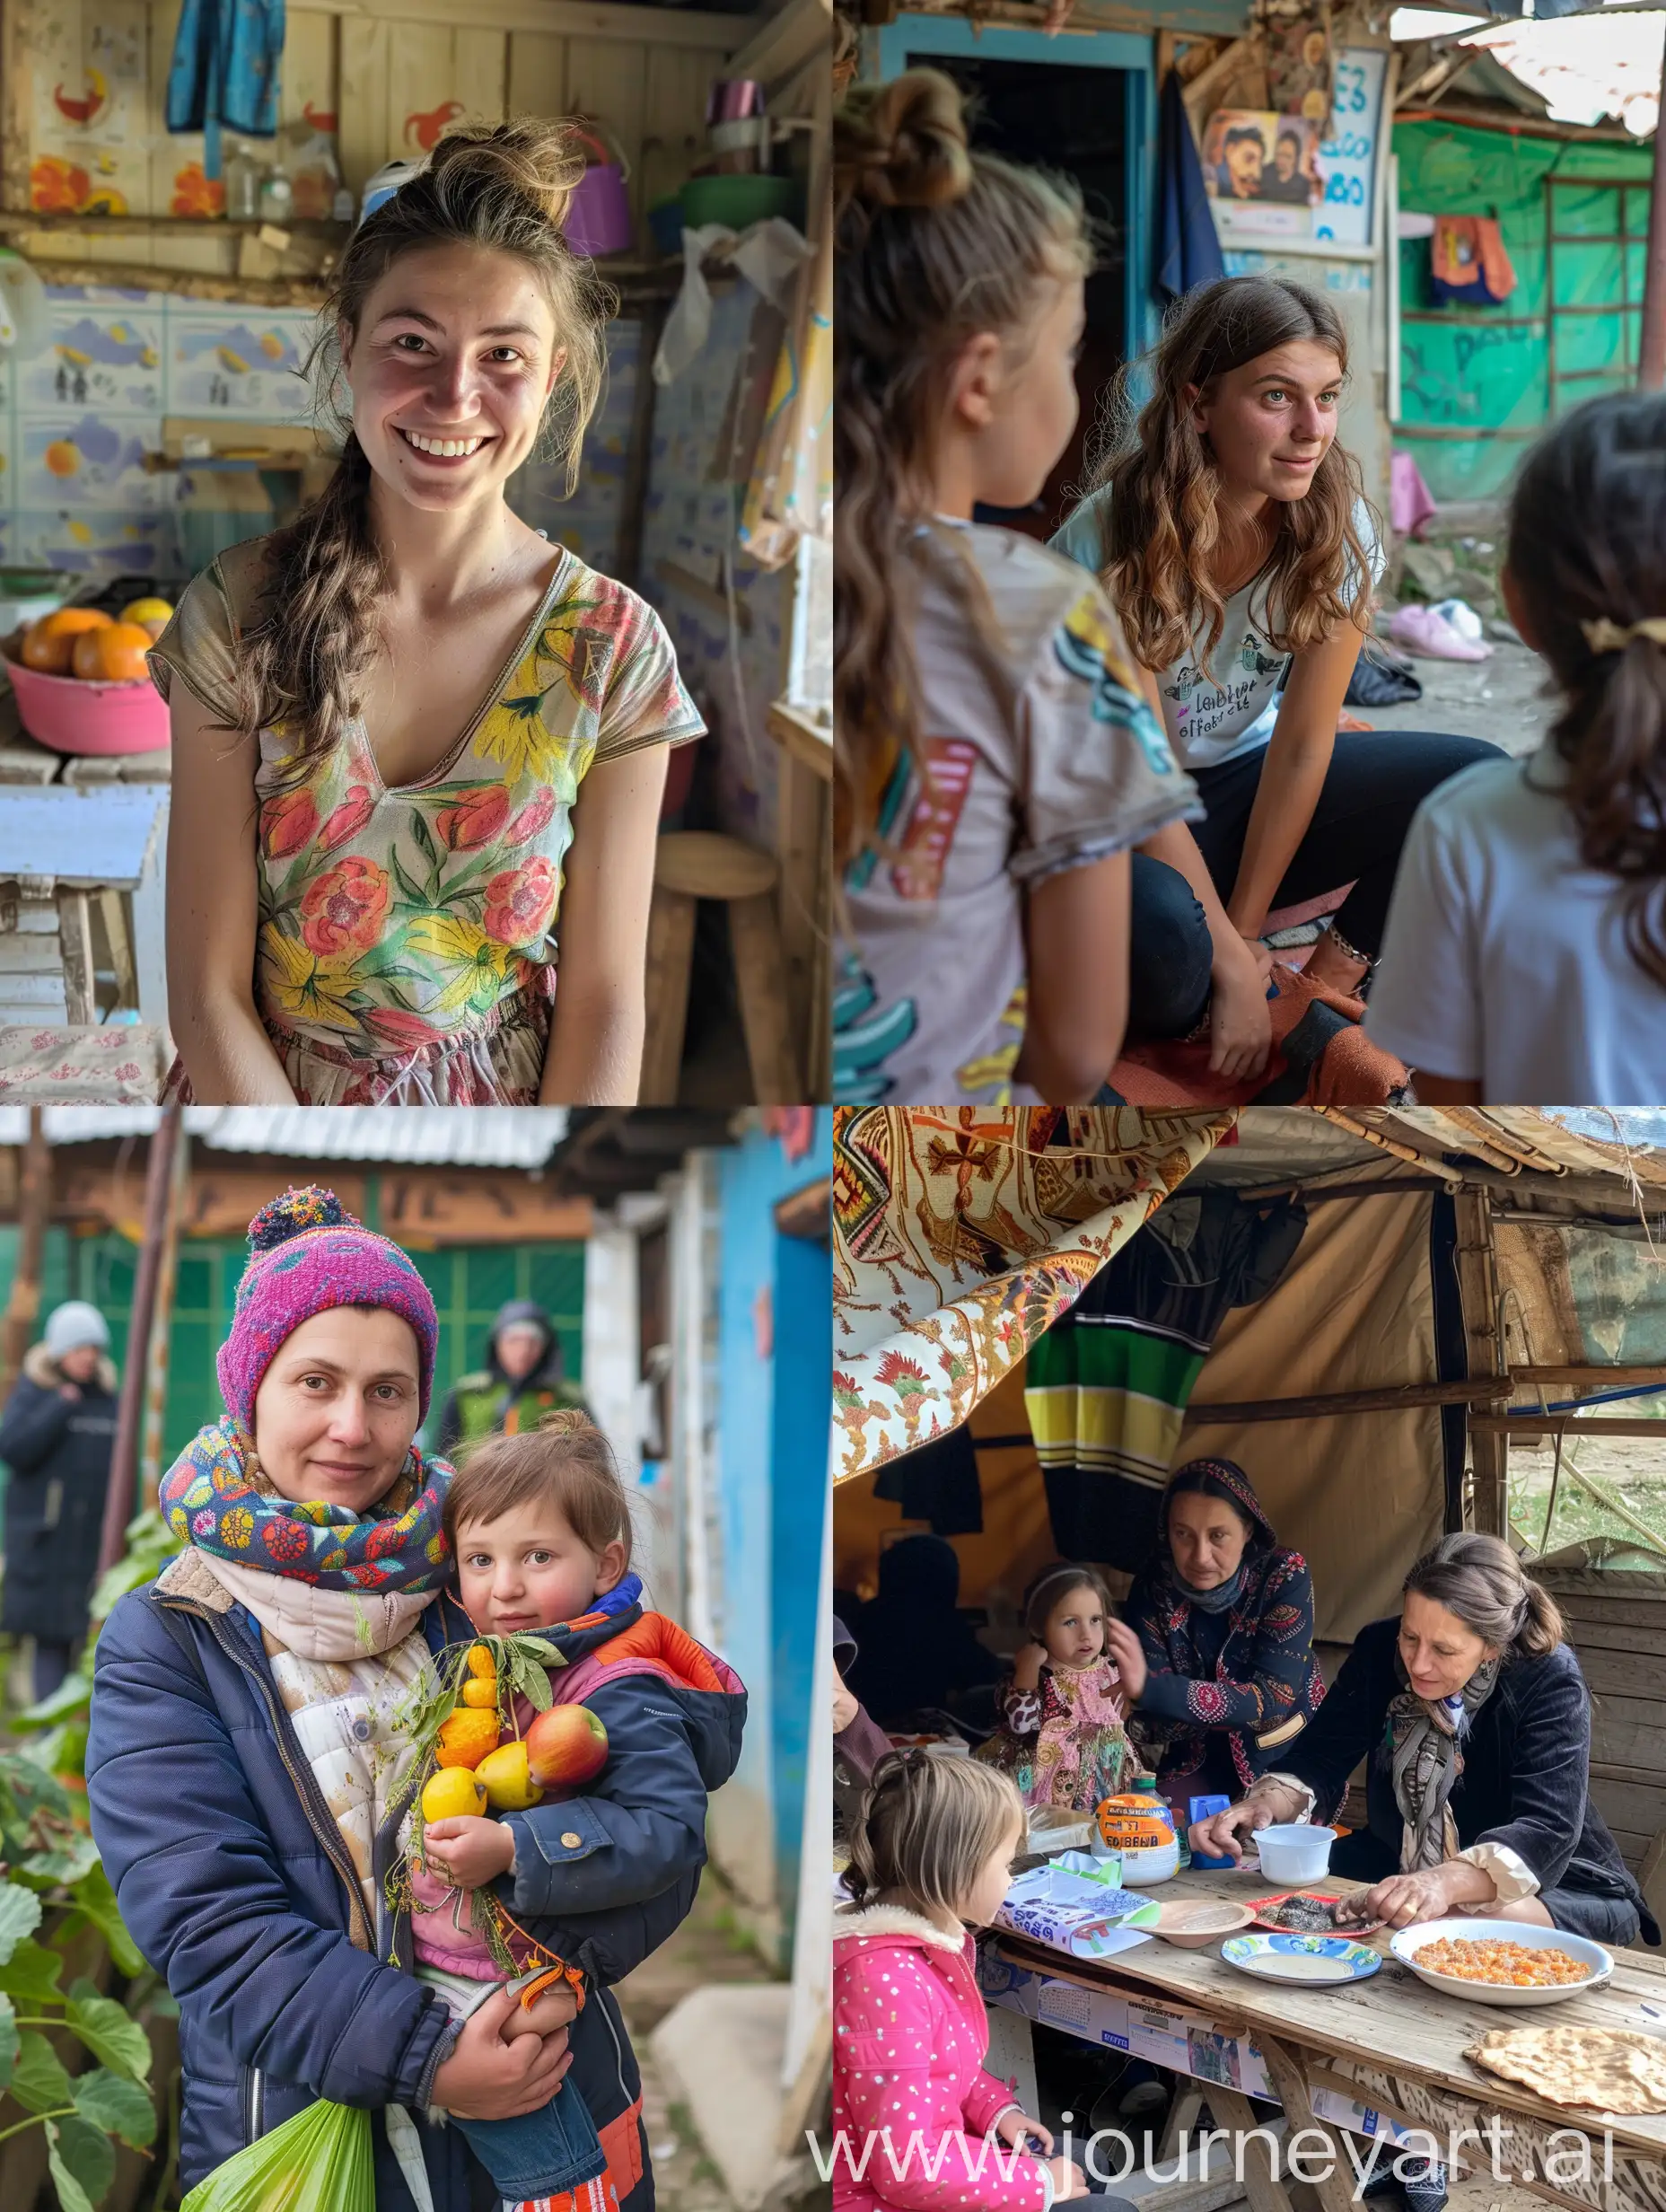 Hello. please create a photo for a banner, vertical, with livelihood activities, business antreneurship trainings  in Moldova 🇲🇩 for Refugees from Ukraine  and local vulnerable population. thank you